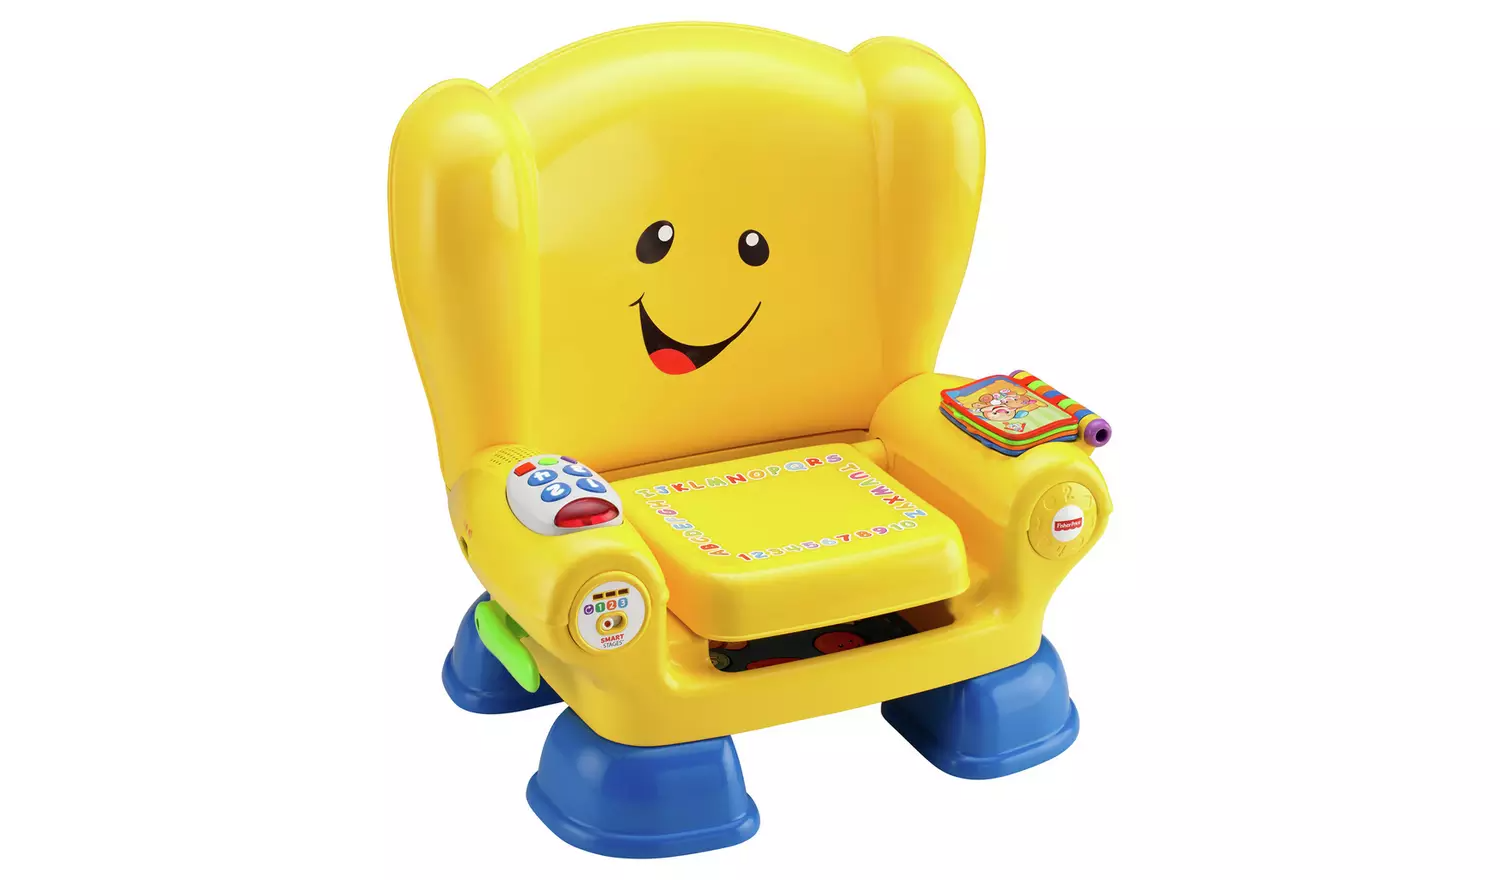 Fisher-Price Laugh & Learn Smart Stages Chair